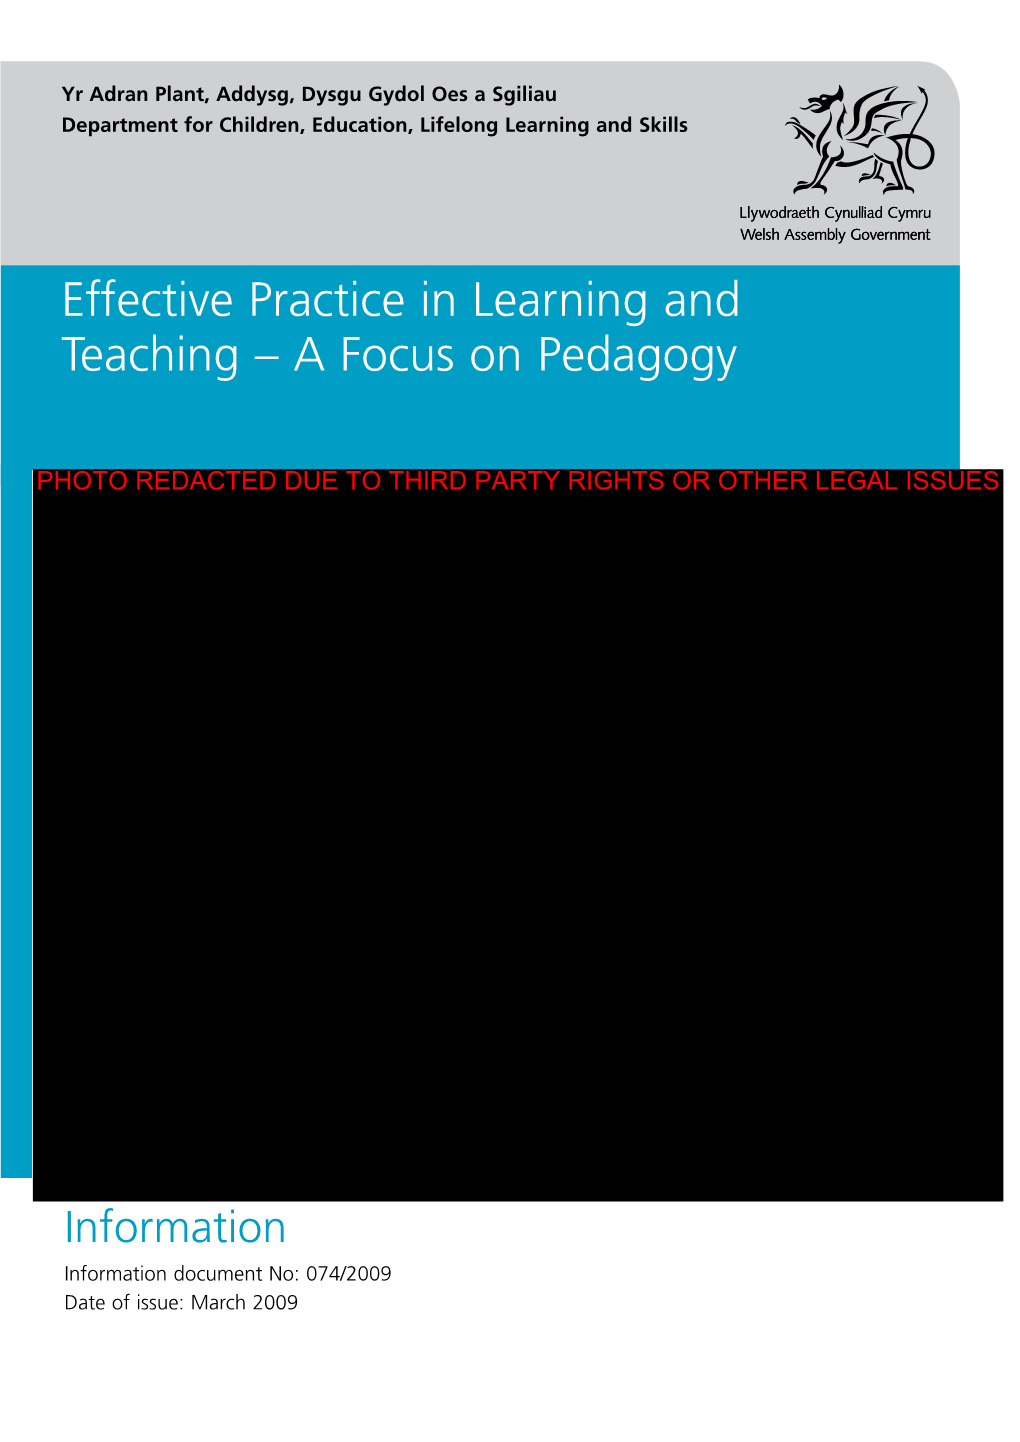 Effective Practice in Learning and Teaching – a Focus on Pedagogy